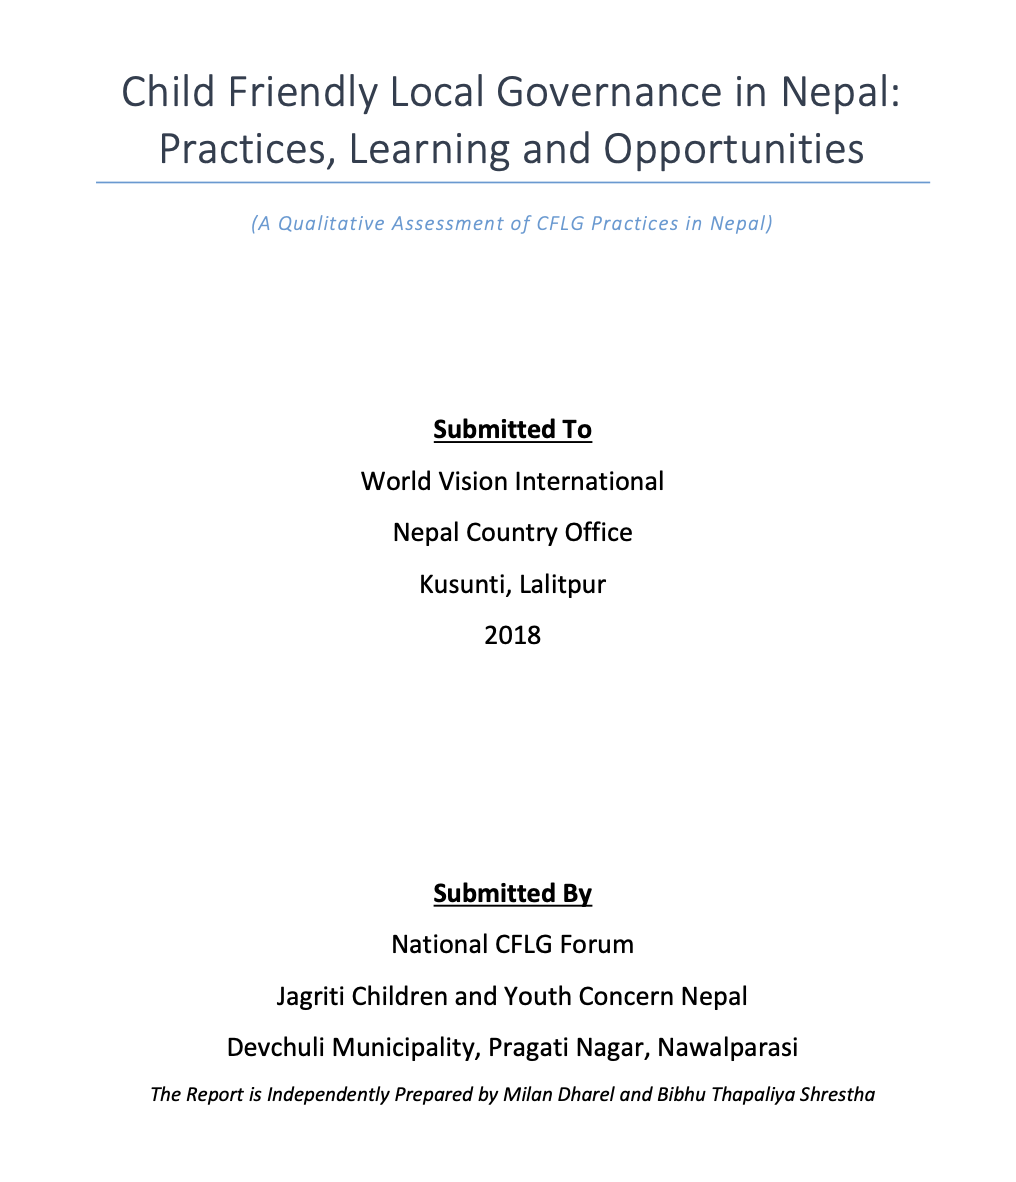 Child Friendly Local Governance in Nepal: Practices, Learning and Opportunities